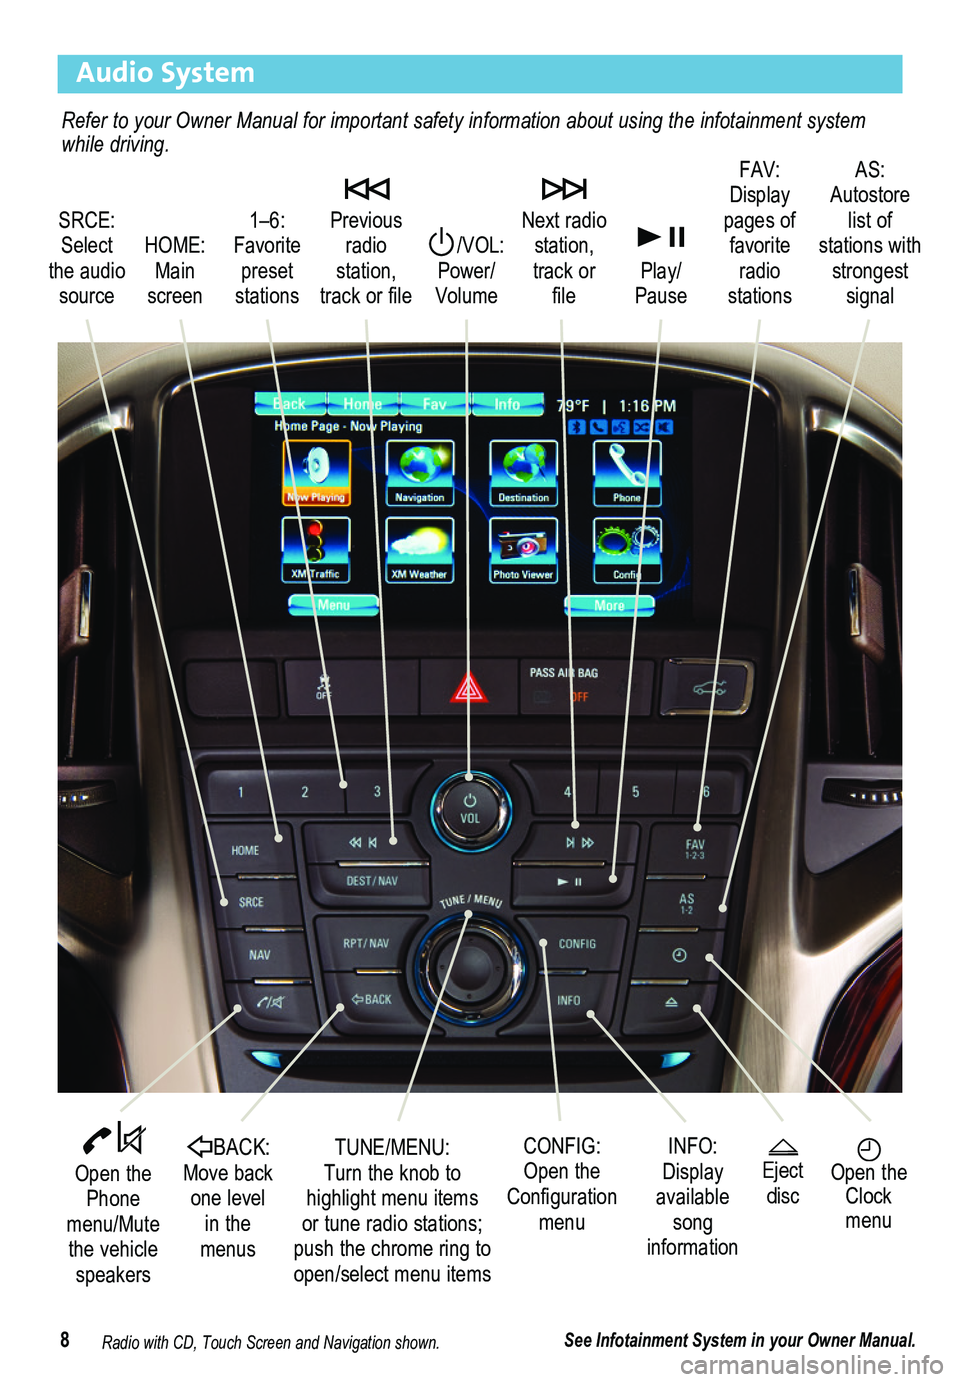 BUICK VERANO 2015  Get To Know Guide 8
Audio System
Radio with CD, Touch Screen and Navigation shown.
SRCE: Select the audio source
/VOL: Power/ Volume
 Next radio station, track or file
1–6: Favorite preset stations
HOME: Main screen
